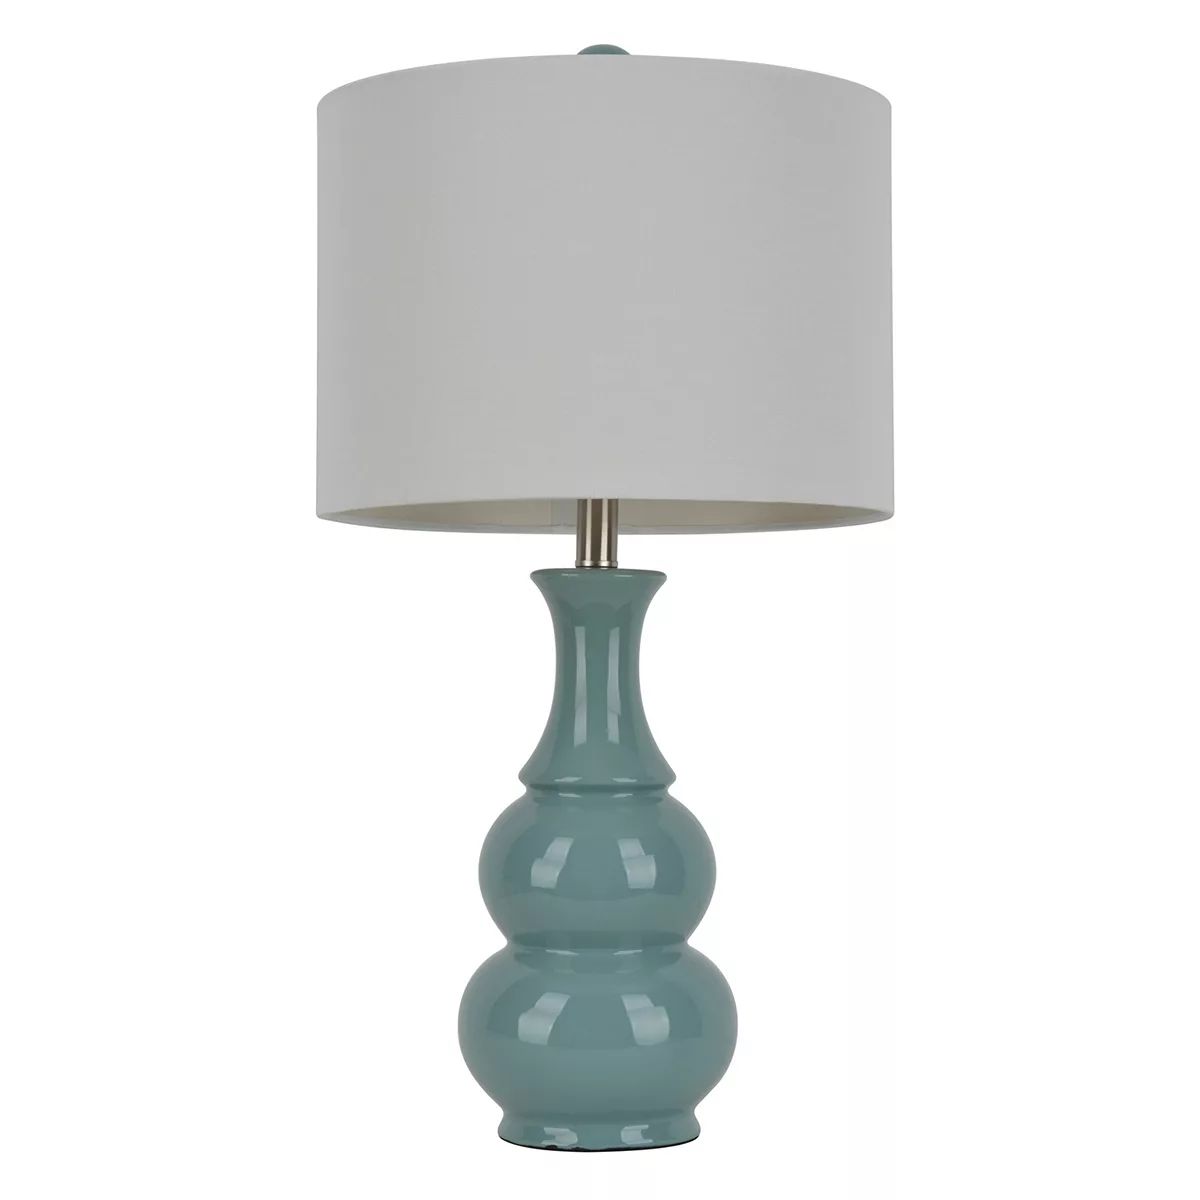 Decor Therapy Green Ceramic Table Lamp | Kohl's